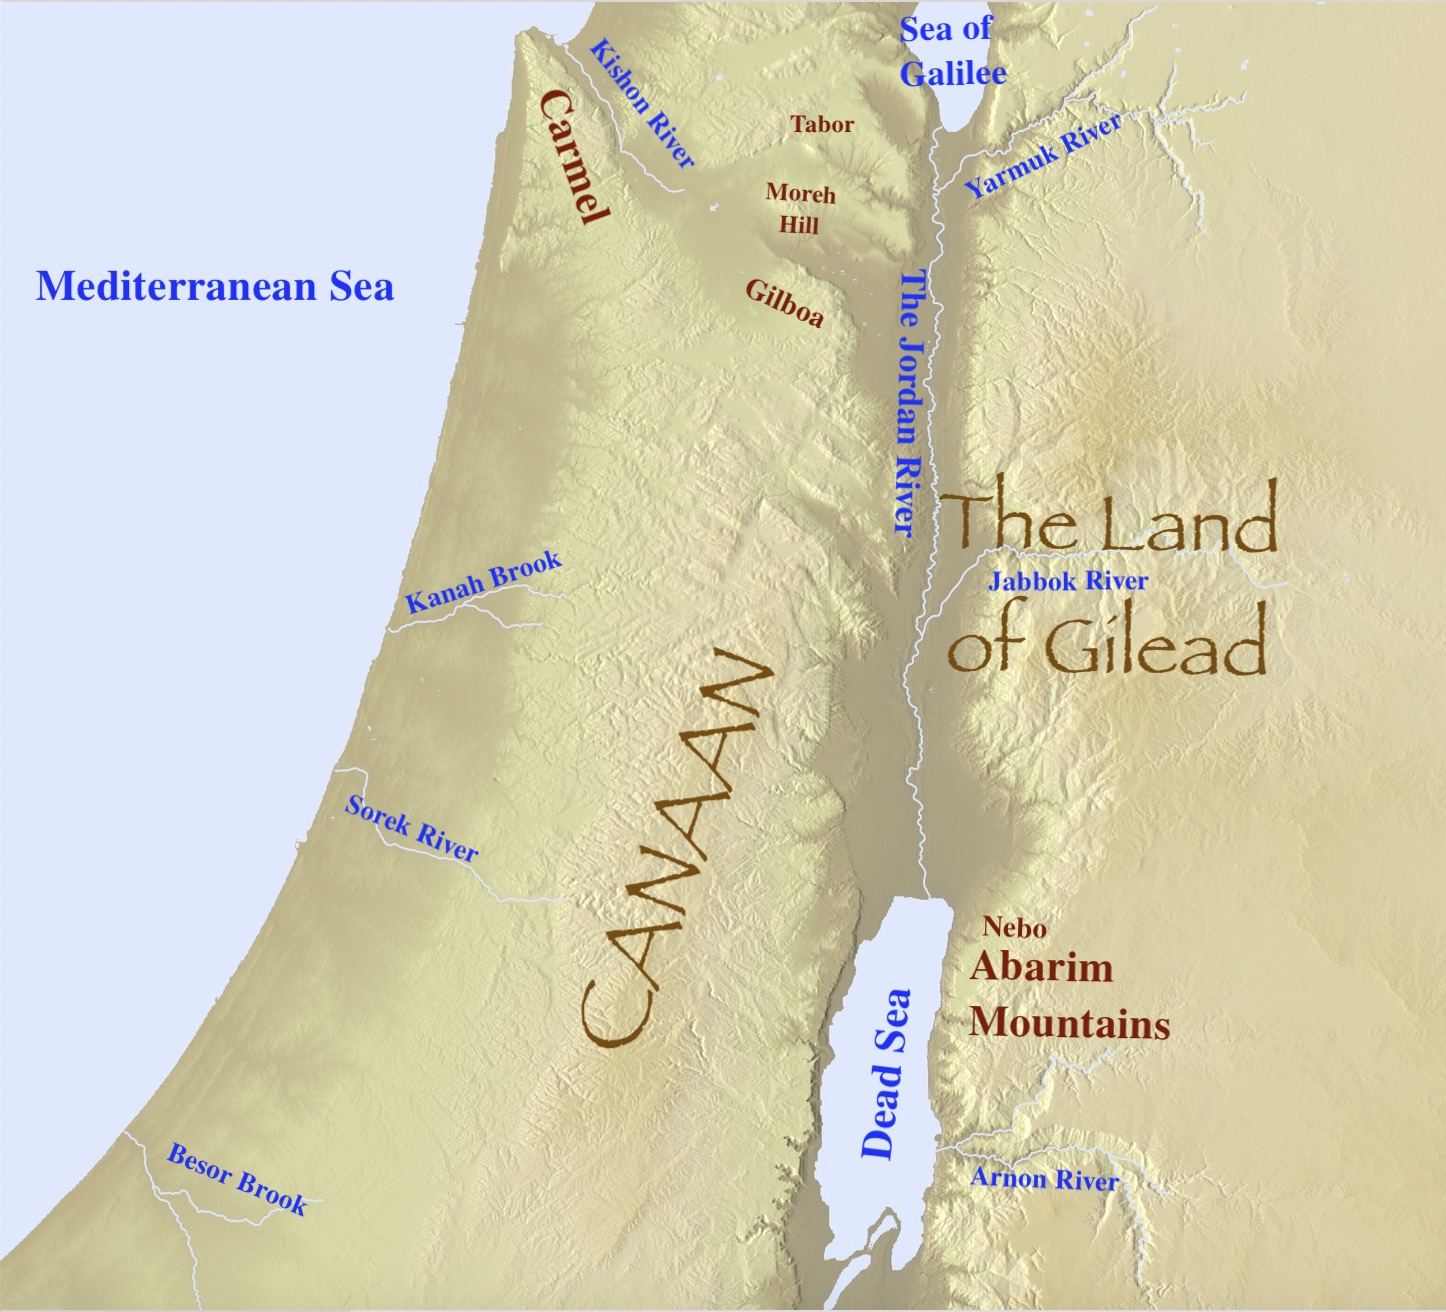 A map of the land of Gilead east of the Jordan River.